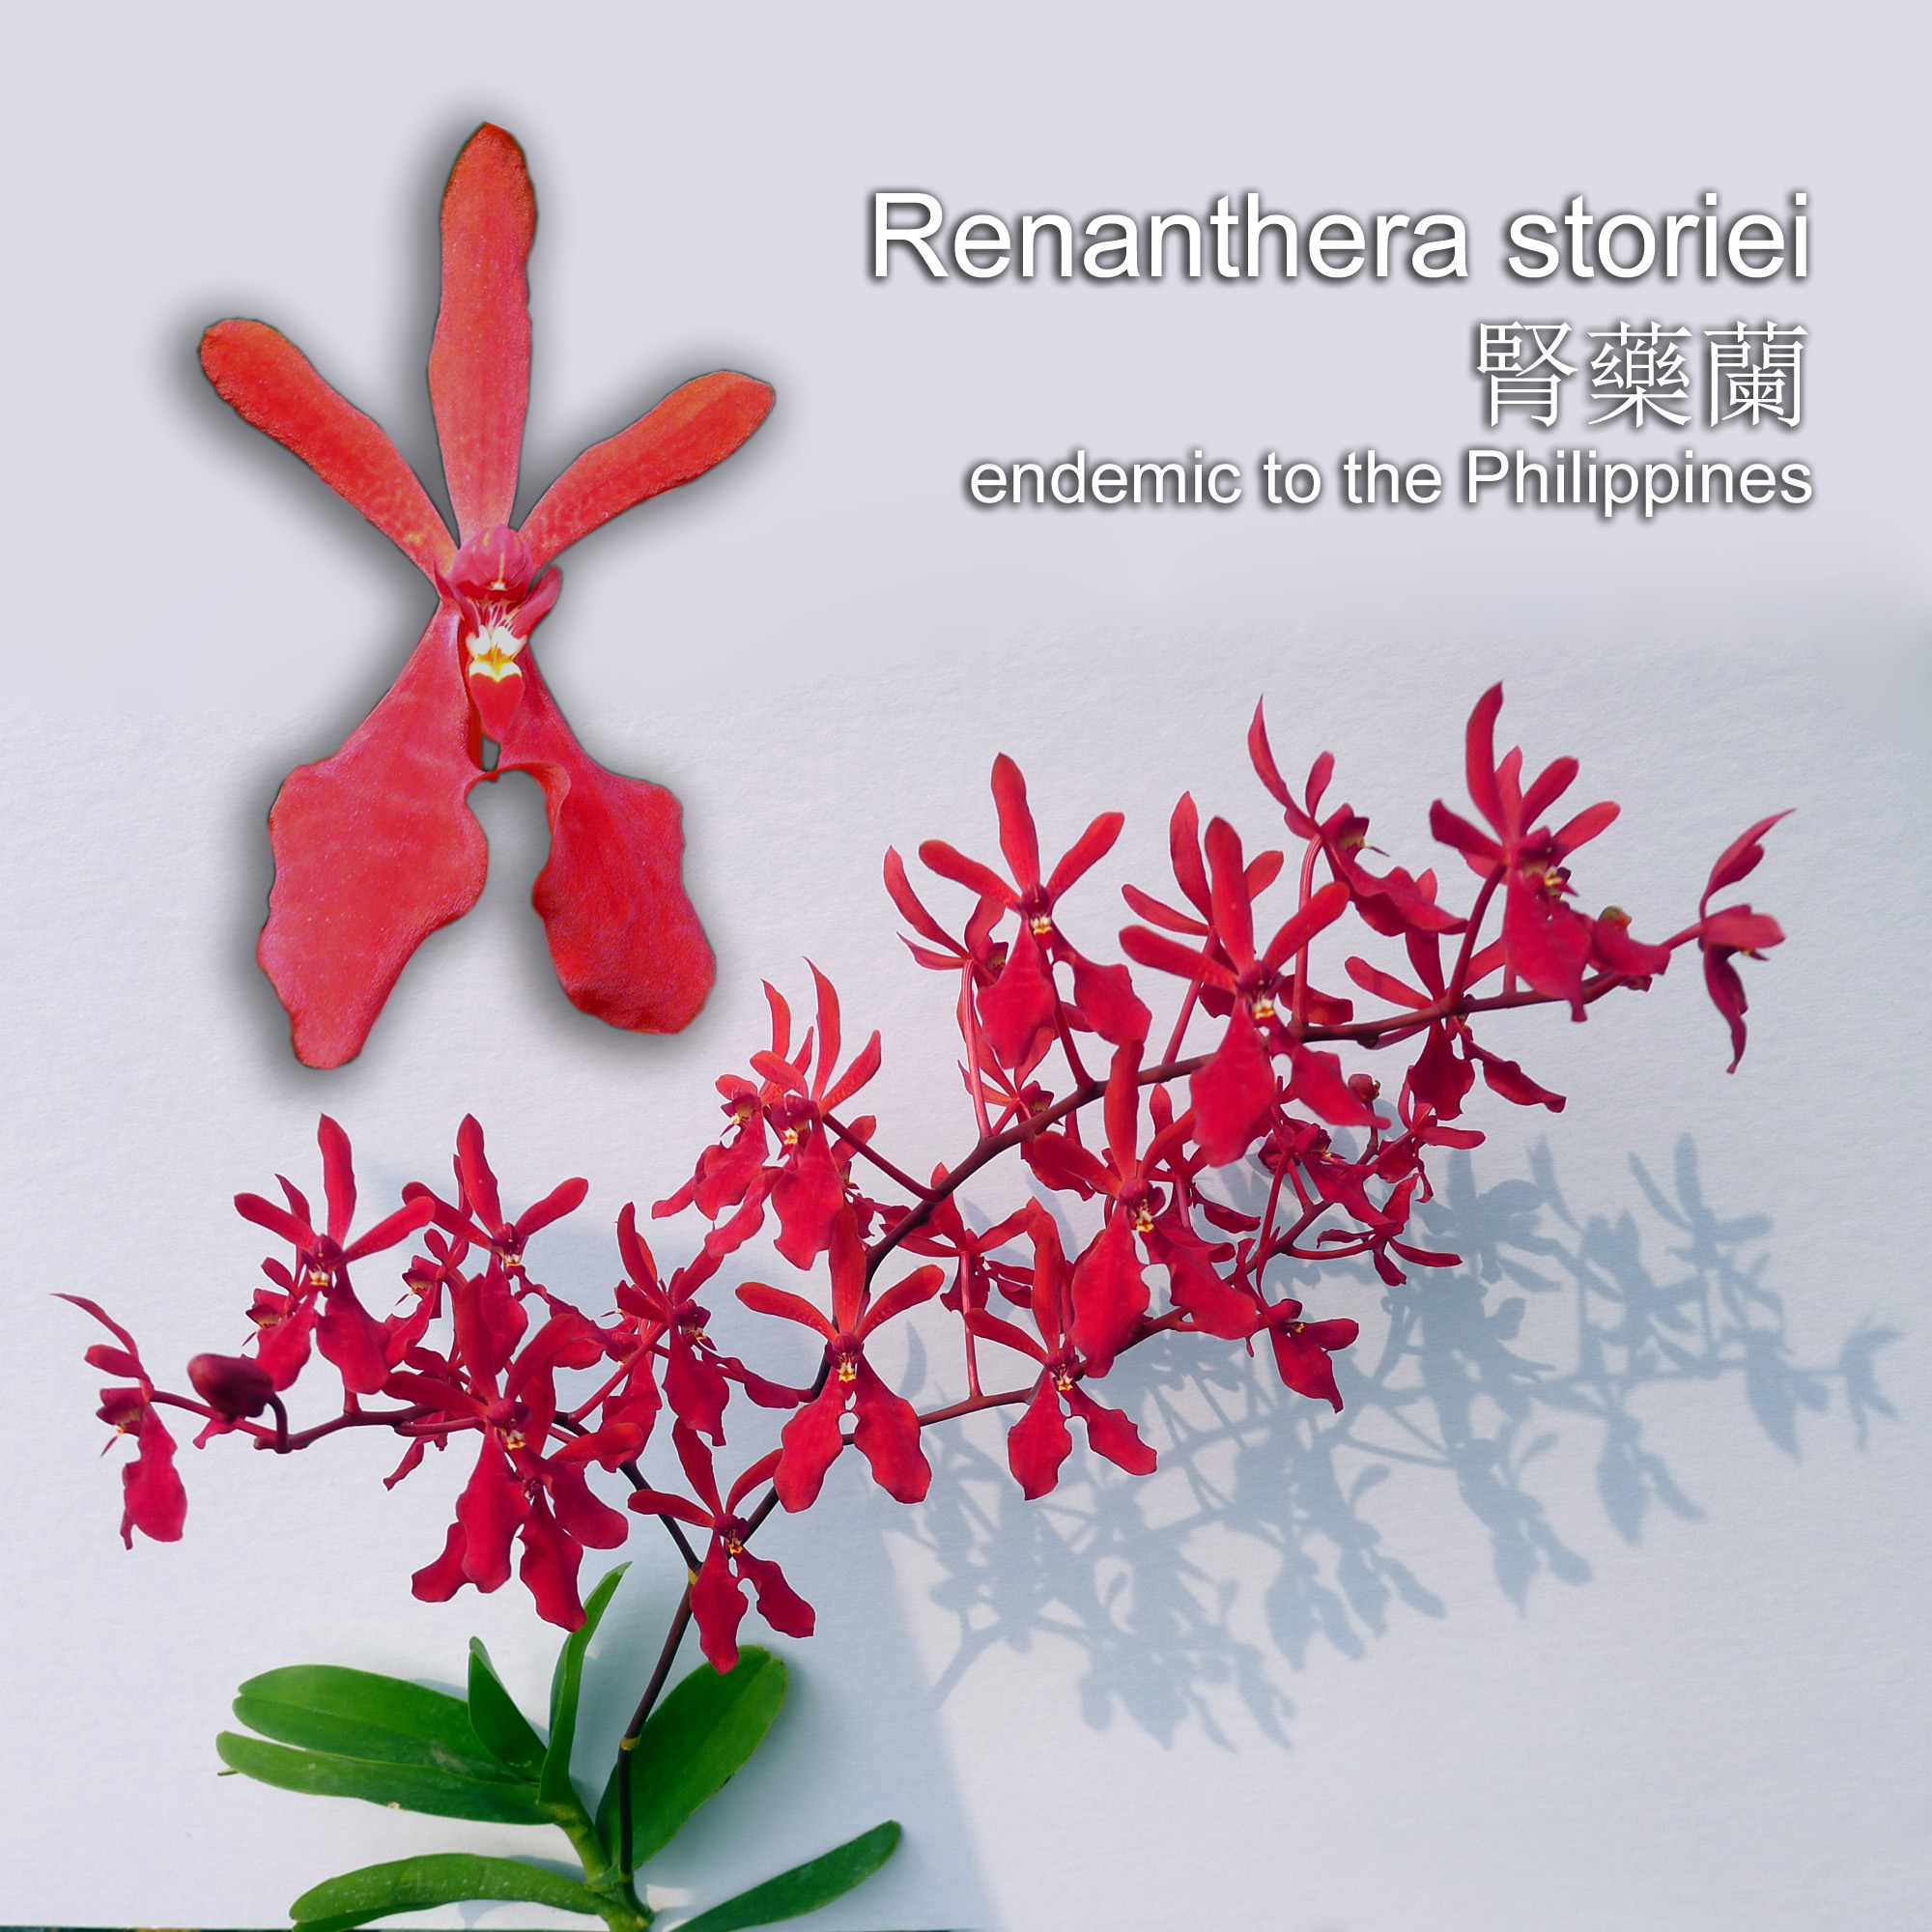 Renanthera storiei 腎藥蘭 endemic to the Philippines